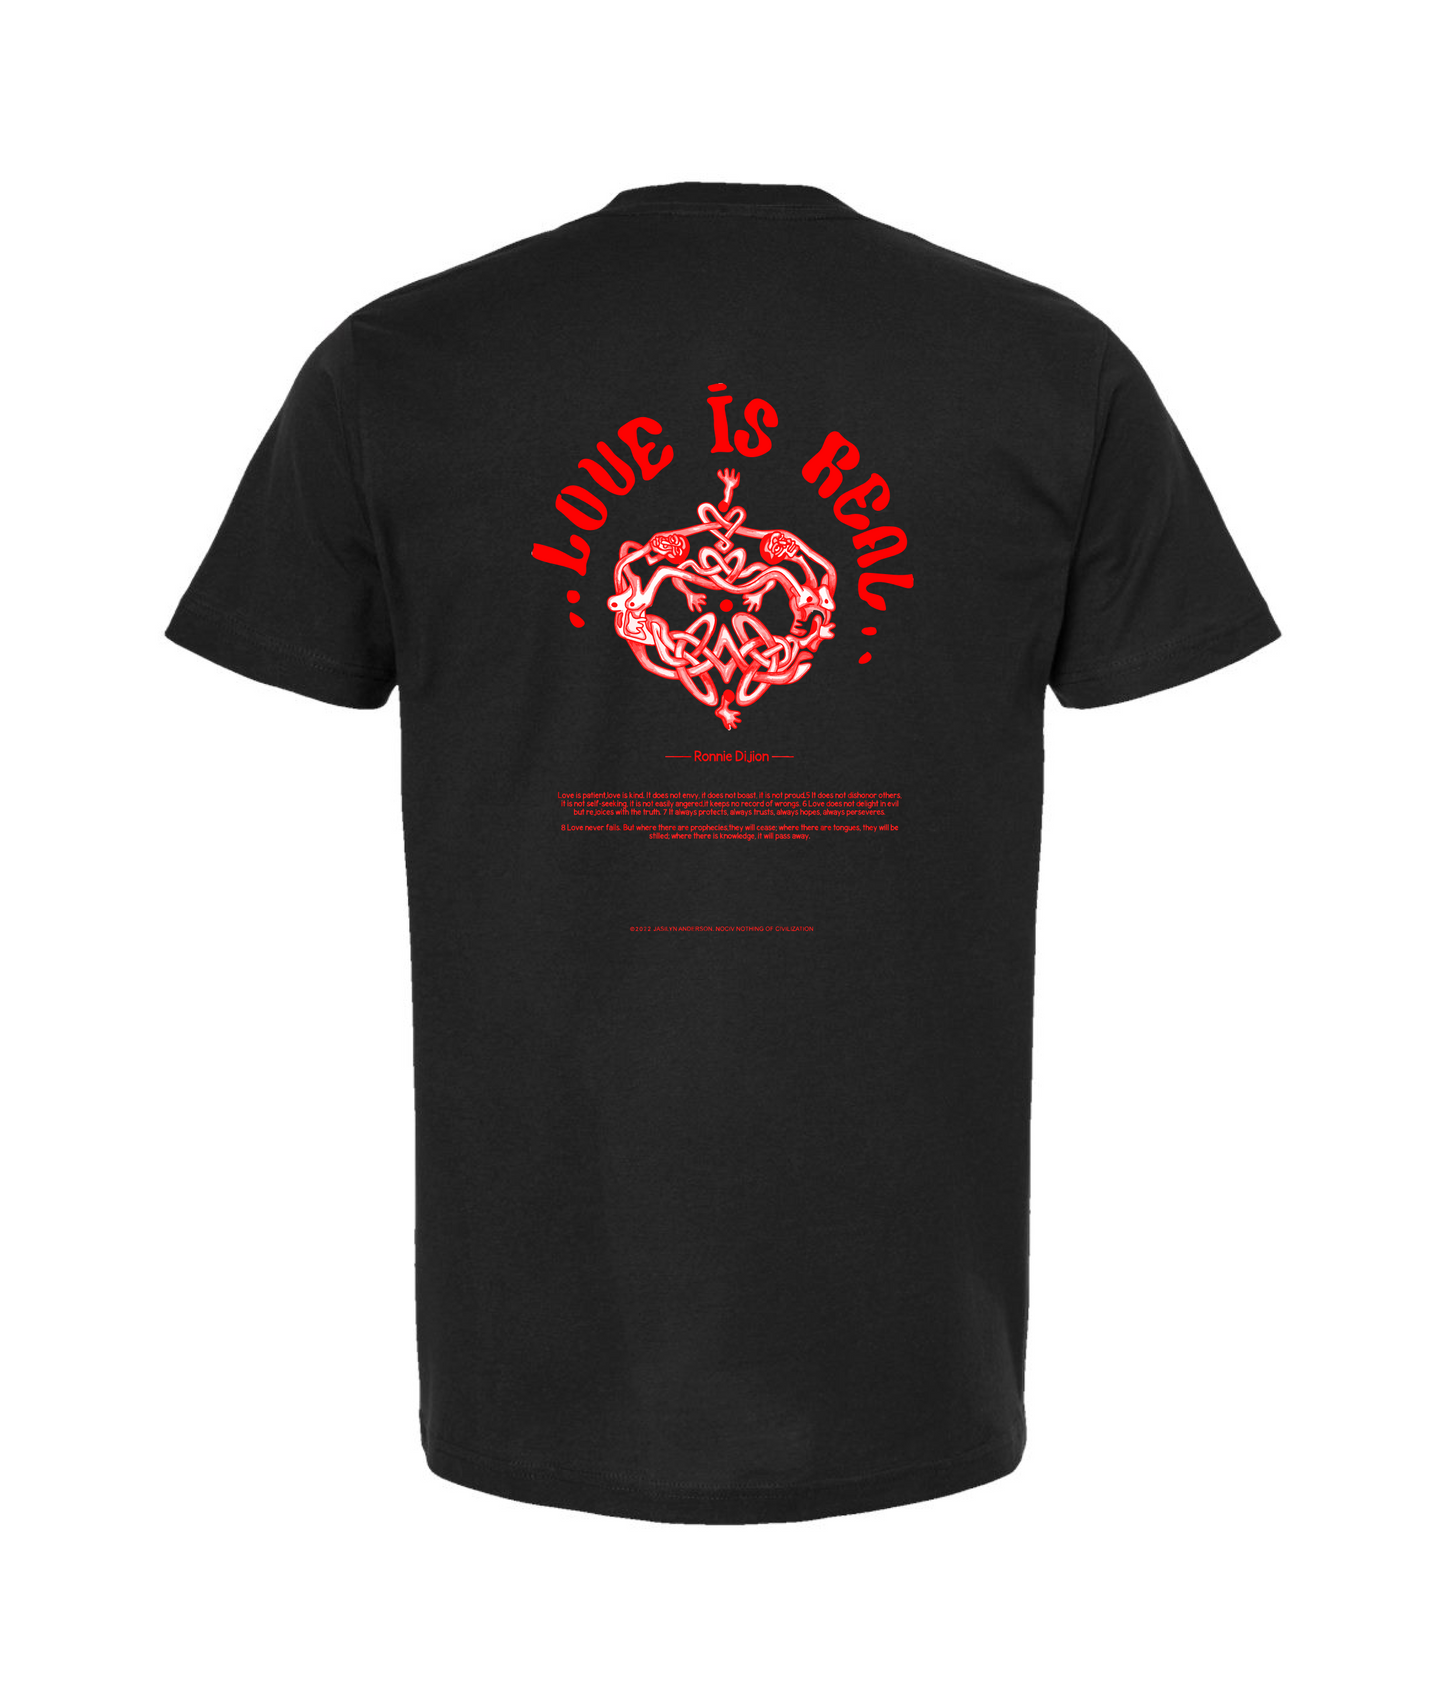 LOVE IS REAL - Logo w/White Highlights - Black T-Shirt